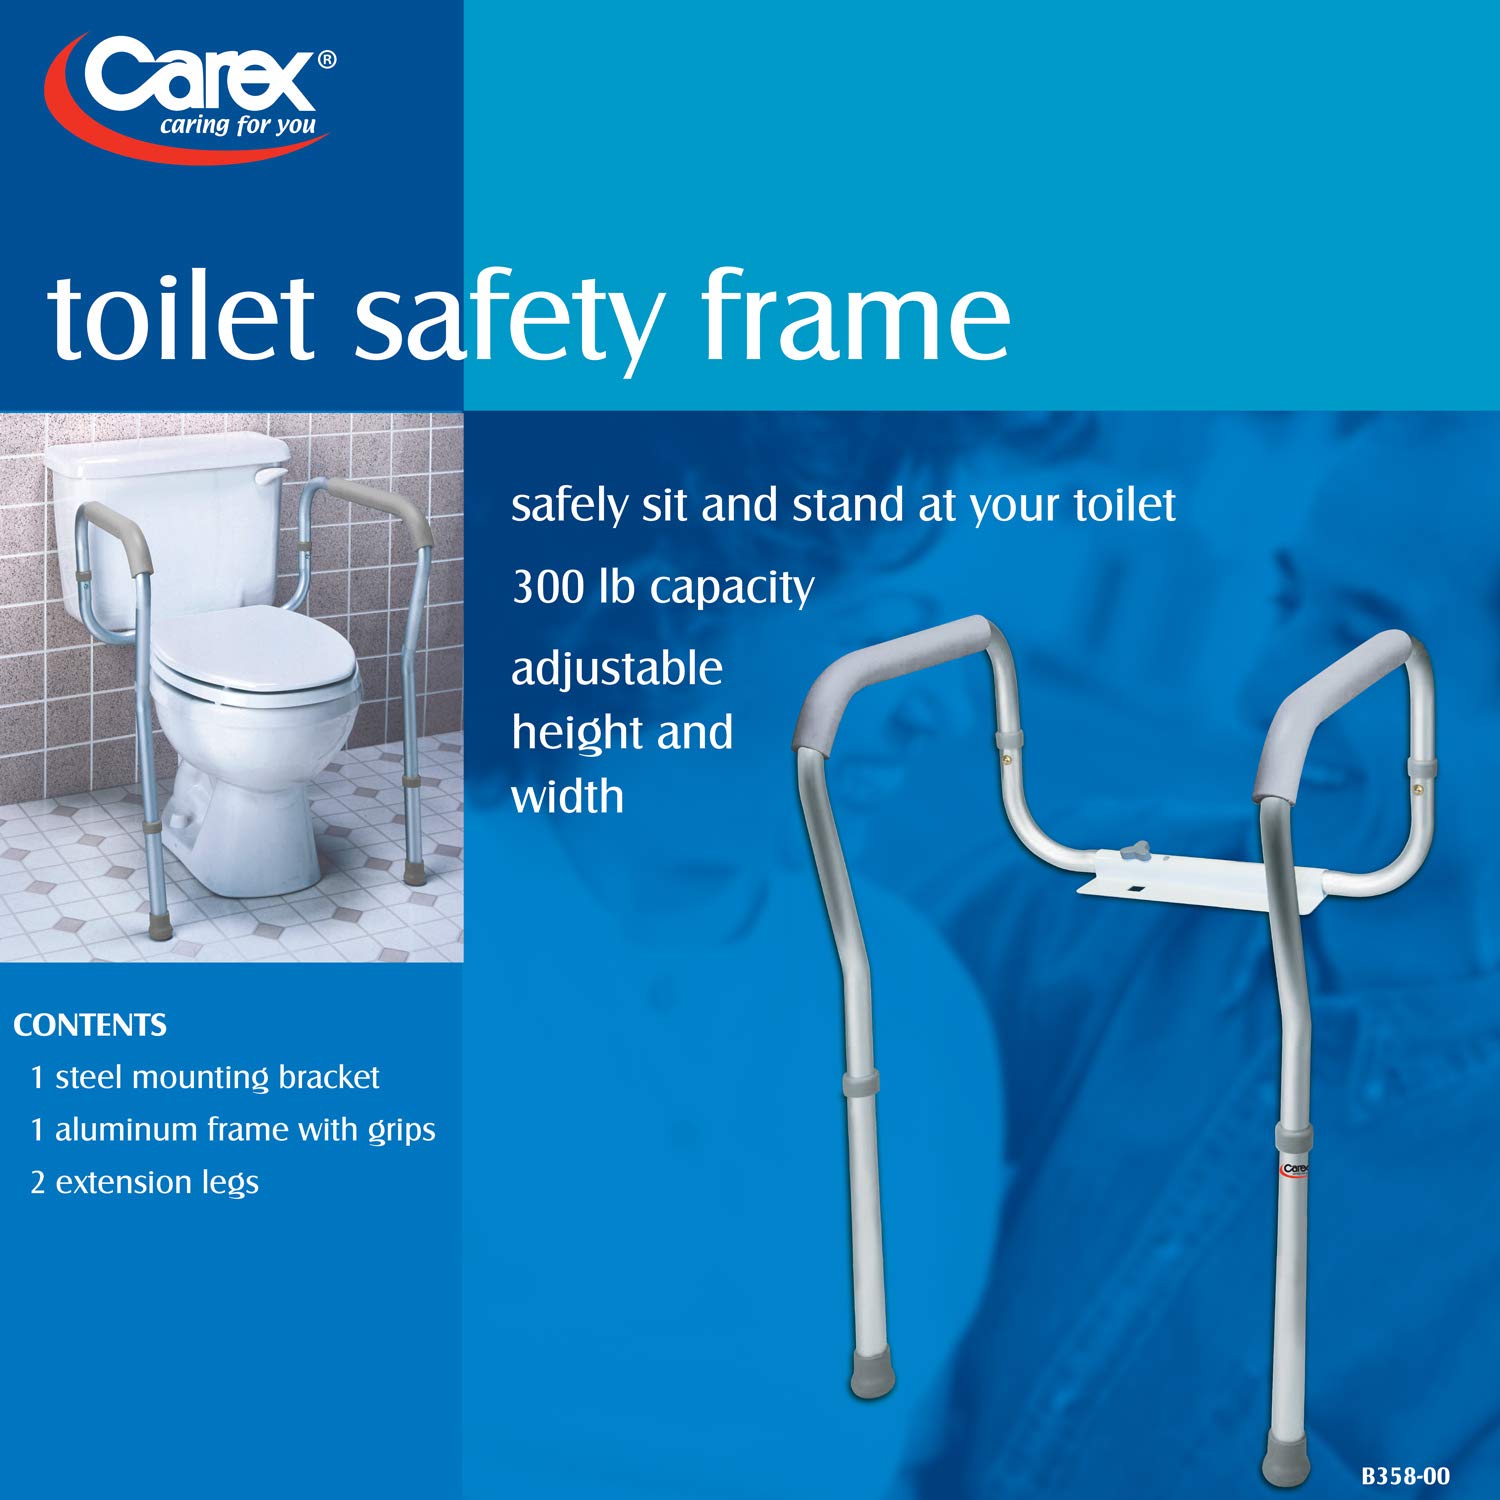 Carex Toilet Safety Frame - Toilet Safety Rails and Grab Bars for Seniors, Elderly, Disabled, Handicap - Easy Install with Adjustable Width/Height, Fits Most Toilets